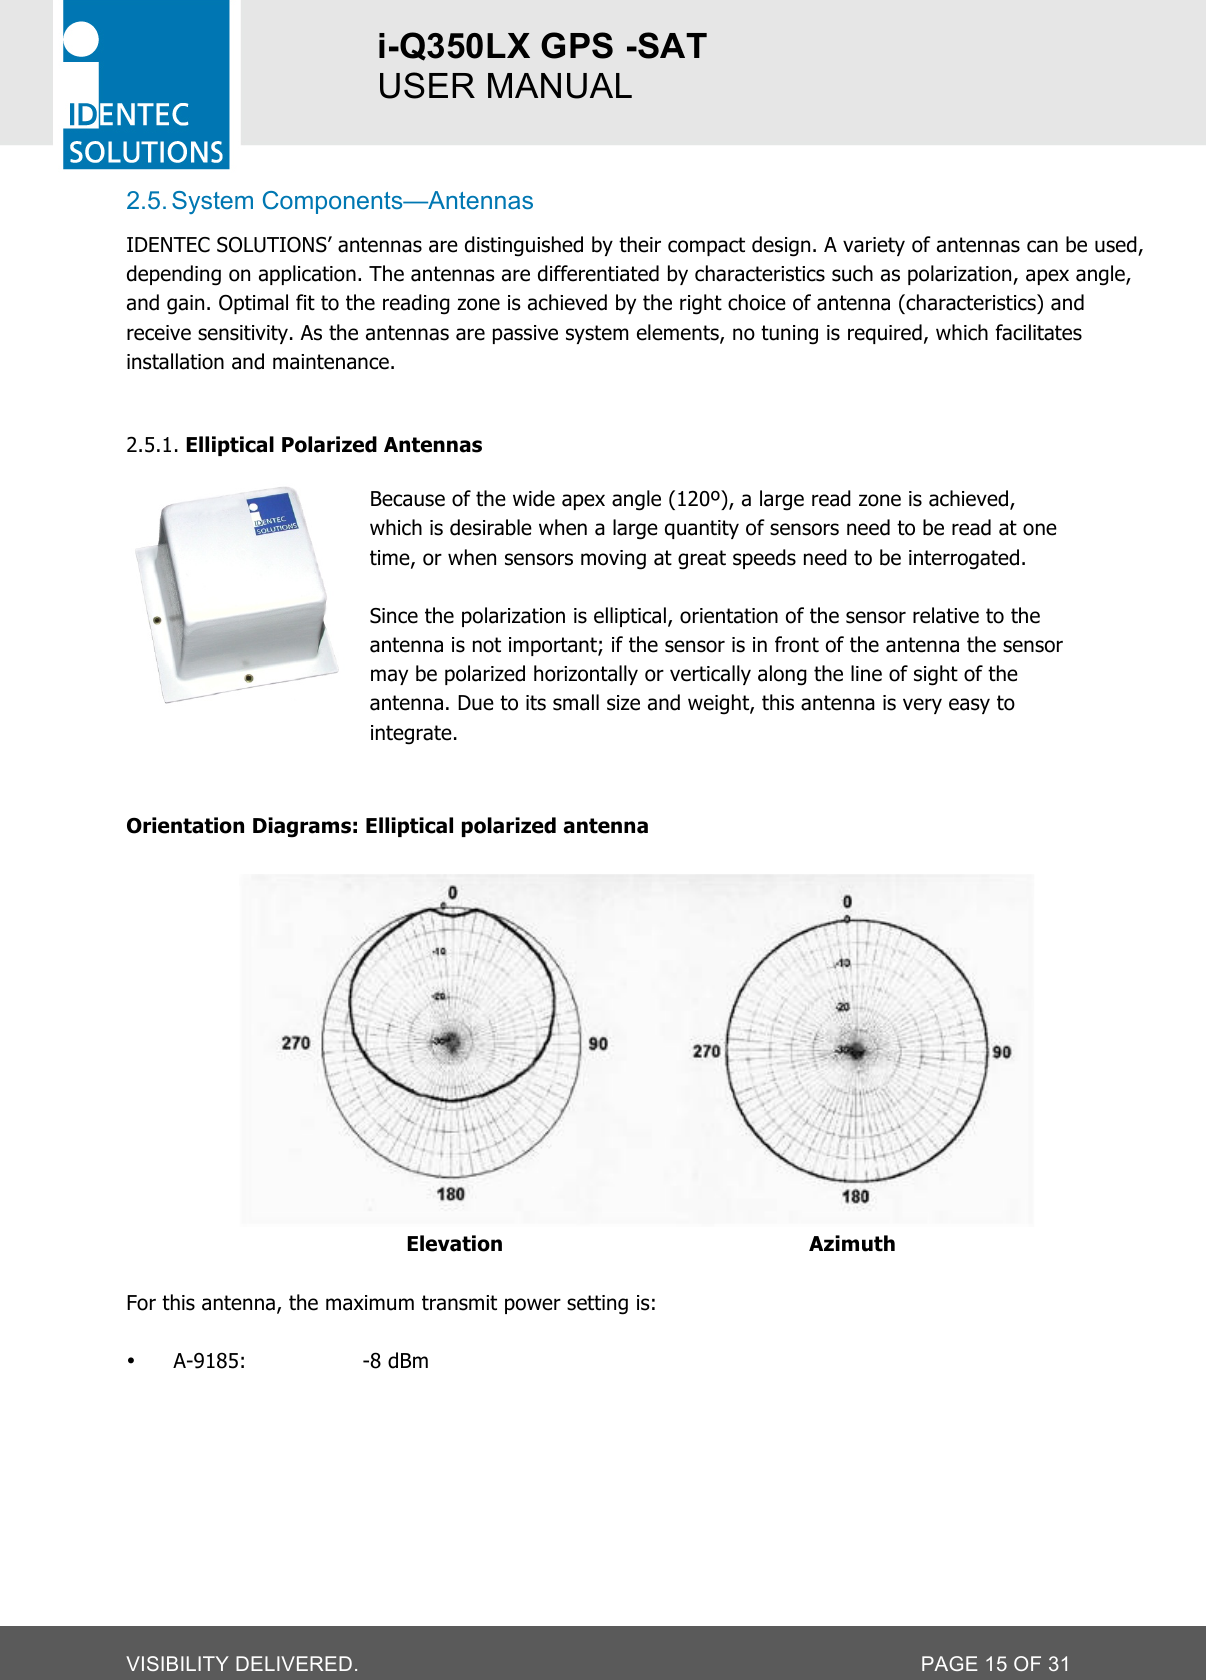 i-Q350LX GPS -SAT  USER MANUAL  VISIBILITY DELIVERED.  PAGE 15 OF 31 2.5. System Components—Antennas IDENTEC SOLUTIONS’ antennas are distinguished by their compact design. A variety of antennas can be used, depending on application. The antennas are differentiated by characteristics such as polarization, apex angle, and gain. Optimal fit to the reading zone is achieved by the right choice of antenna (characteristics) and receive sensitivity. As the antennas are passive system elements, no tuning is required, which facilitates installation and maintenance.  2.5.1. Elliptical Polarized Antennas  Because of the wide apex angle (120º), a large read zone is achieved, which is desirable when a large quantity of sensors need to be read at one time, or when sensors moving at great speeds need to be interrogated.  Since the polarization is elliptical, orientation of the sensor relative to the antenna is not important; if the sensor is in front of the antenna the sensor may be polarized horizontally or vertically along the line of sight of the antenna. Due to its small size and weight, this antenna is very easy to integrate.   Orientation Diagrams: Elliptical polarized antenna    Elevation Azimuth  For this antenna, the maximum transmit power setting is:  • A-9185:    -8 dBm    